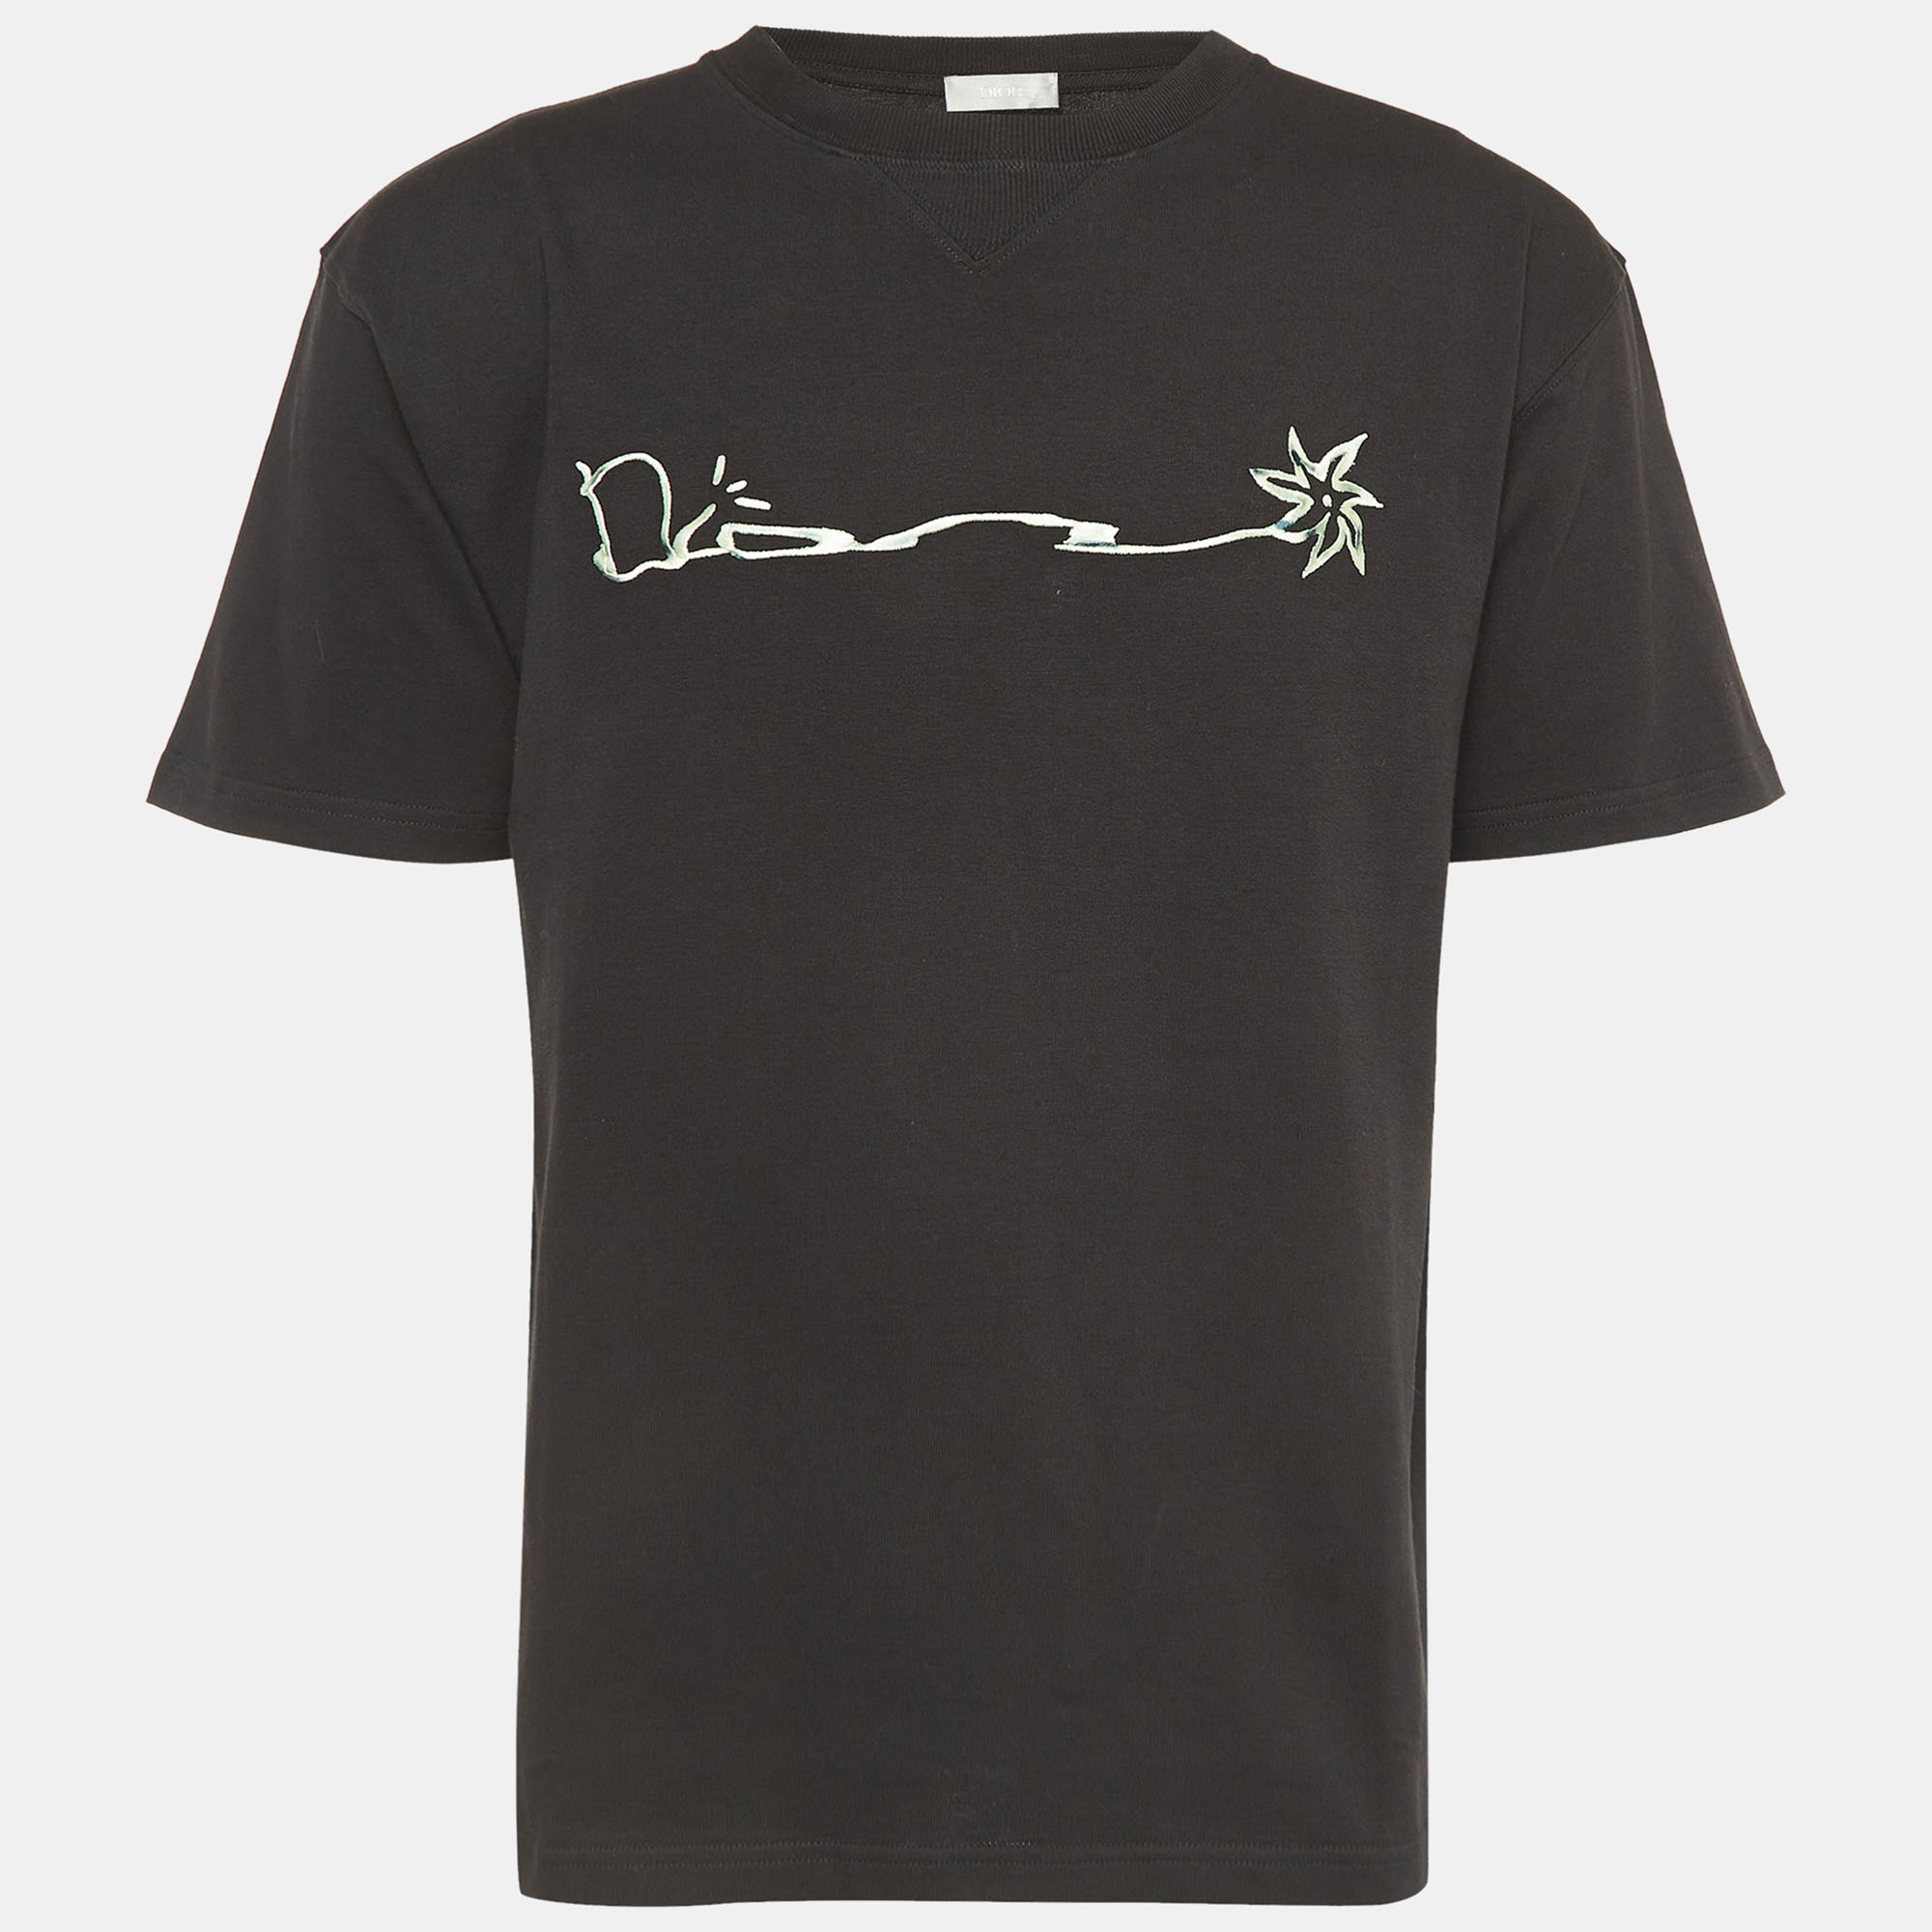 Dior Homme X Cactus Jack Black Embroidered Cotton Oversized T-Shirt M